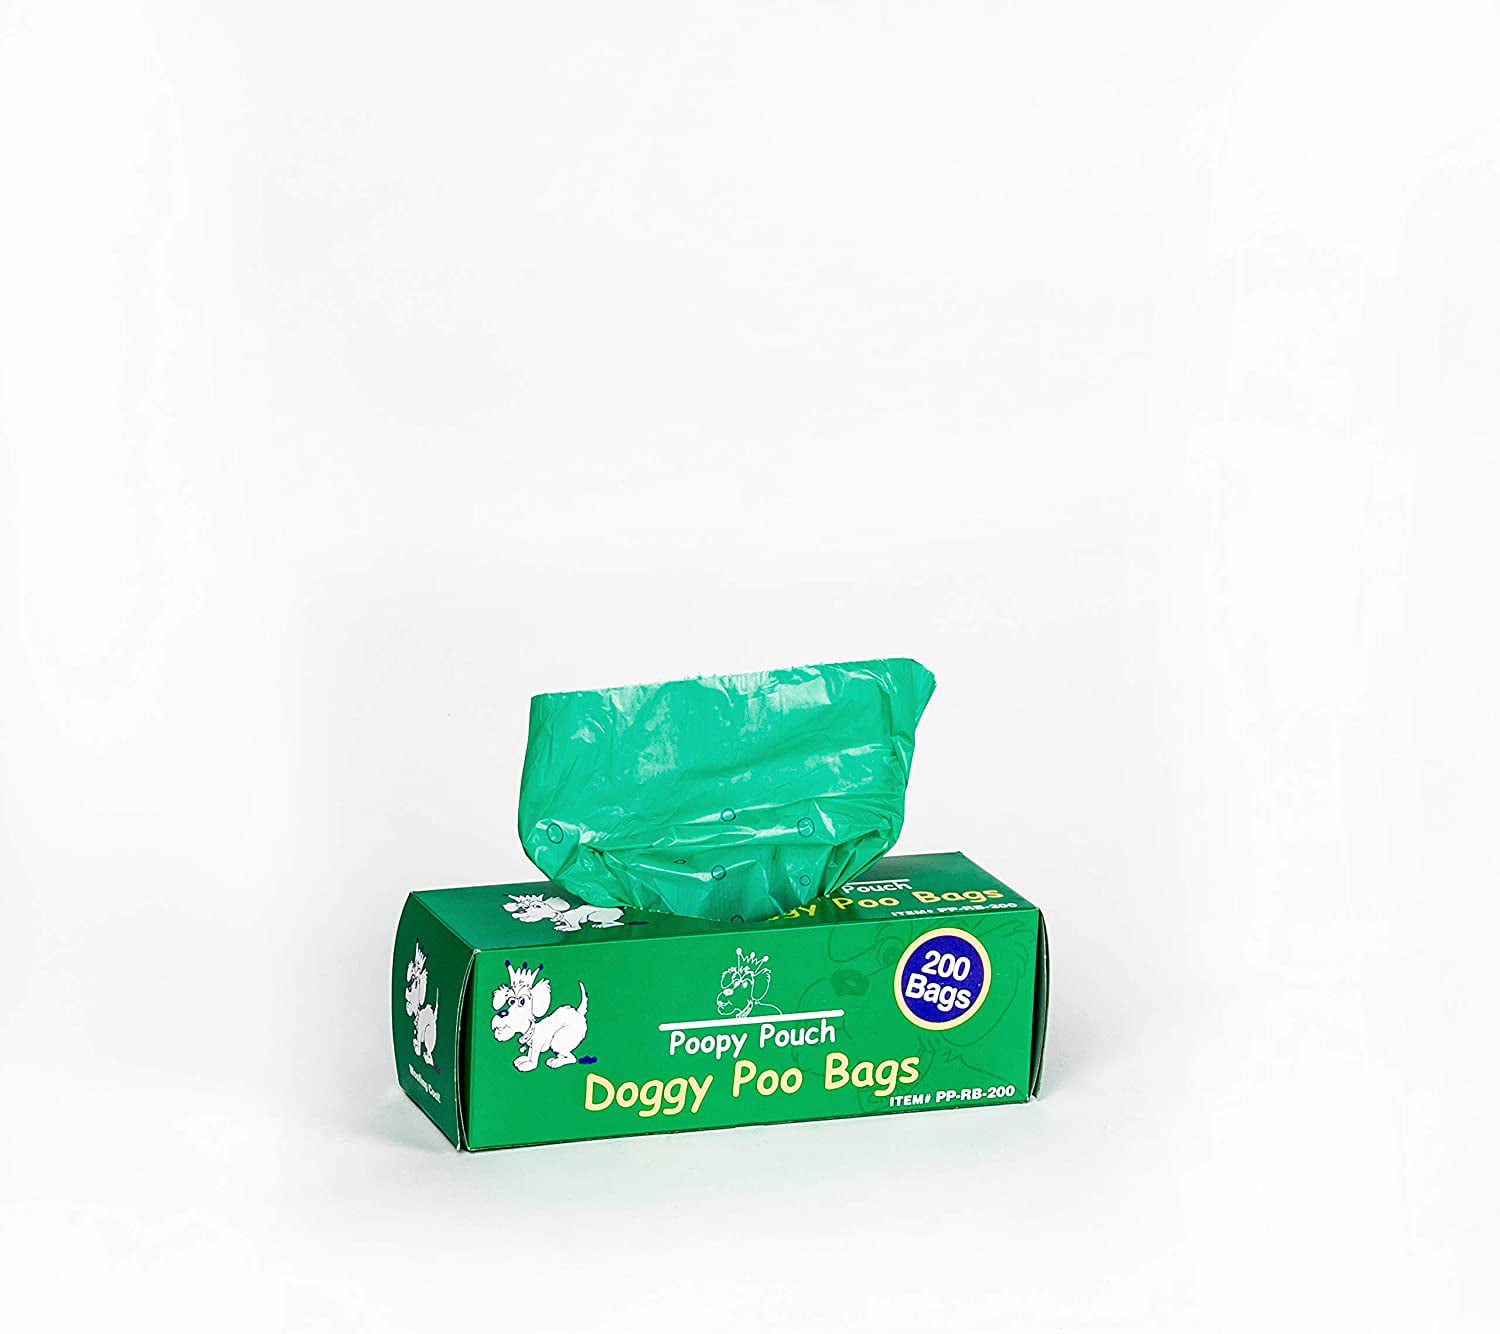 Poopy Pouch 0.75 gal. HDPE Heavy Pet Waste Bag, Bag, Green, 10PK 